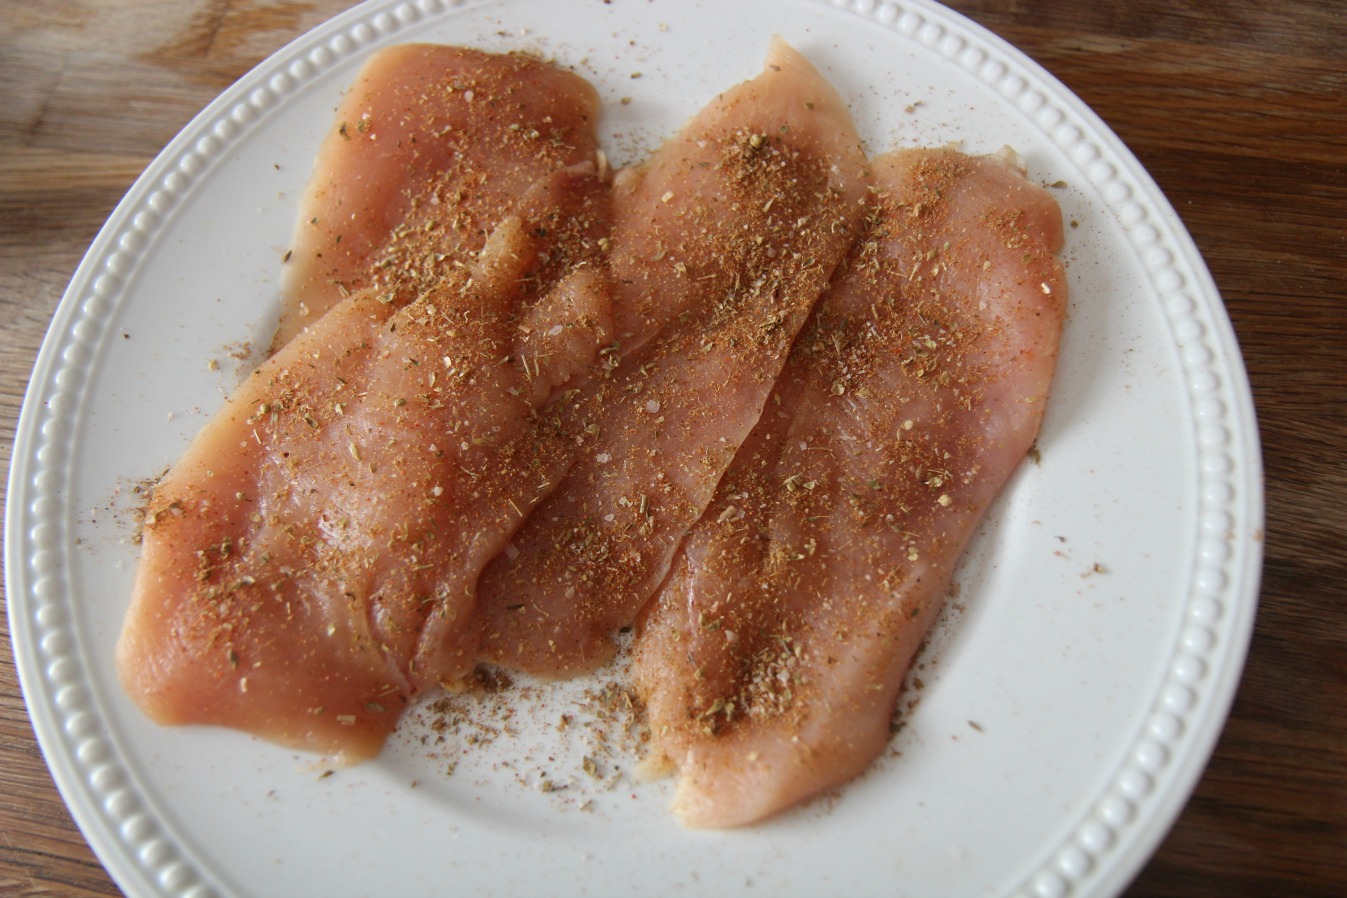 Step one is to season the chicken breasts before cooking. 